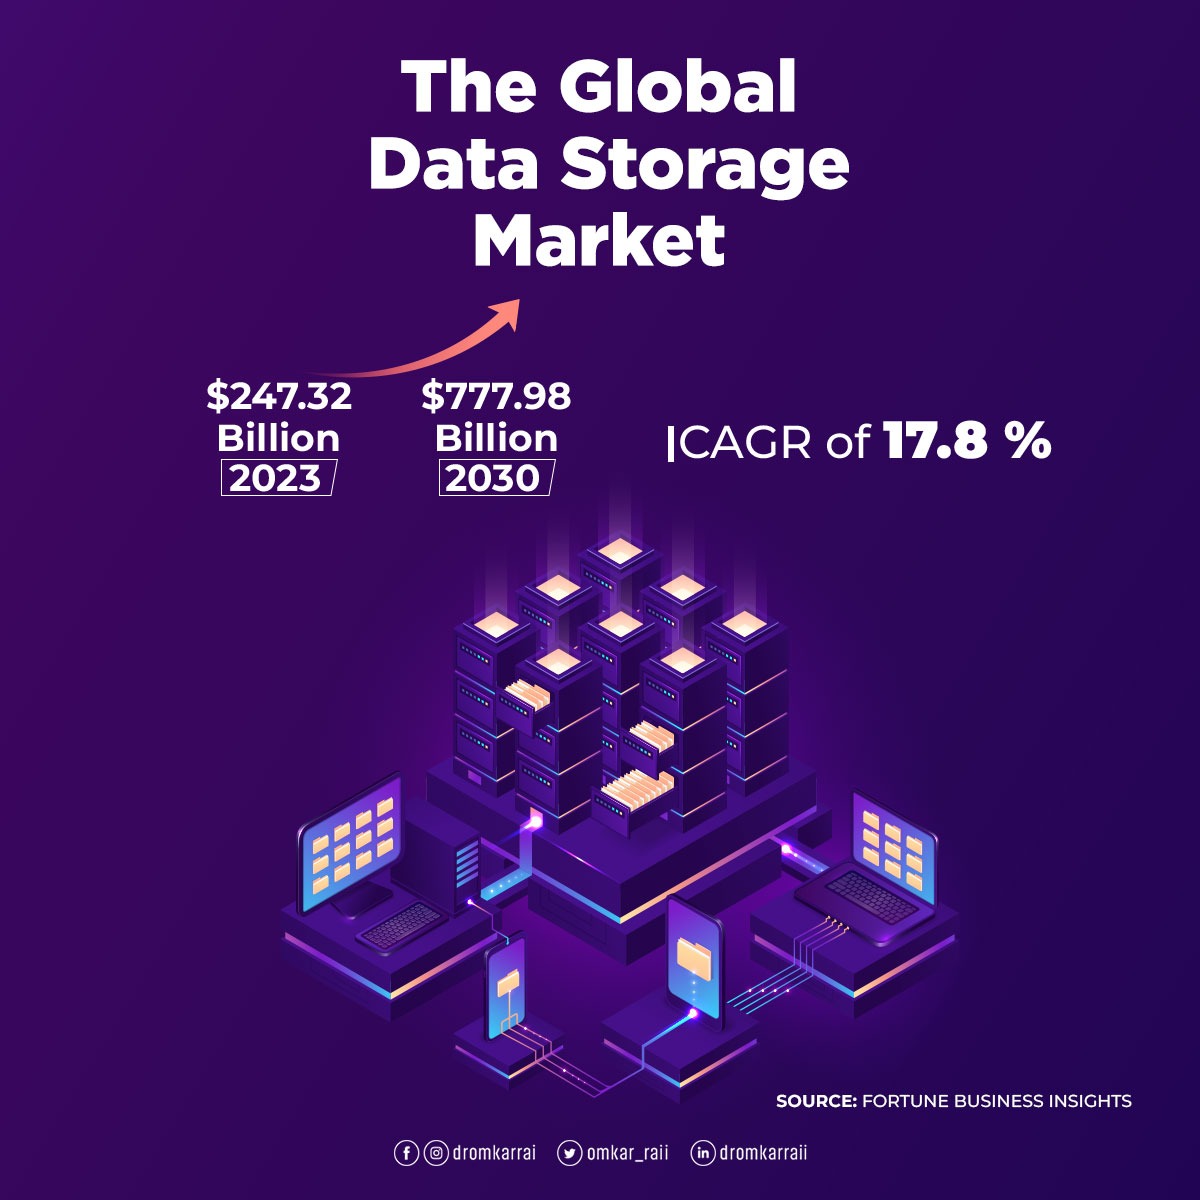 #MarketGrowth

The exponential increase in #data generation in #medical records, #Banking, #insurance, #Hospitality & other sectors has pressed for increasing #DataStorage abilities.

#DataStorageMarket #BigDataStorage
#CloudStorageSolutions #DataRetention.

@IBM @Infinidat  @HP